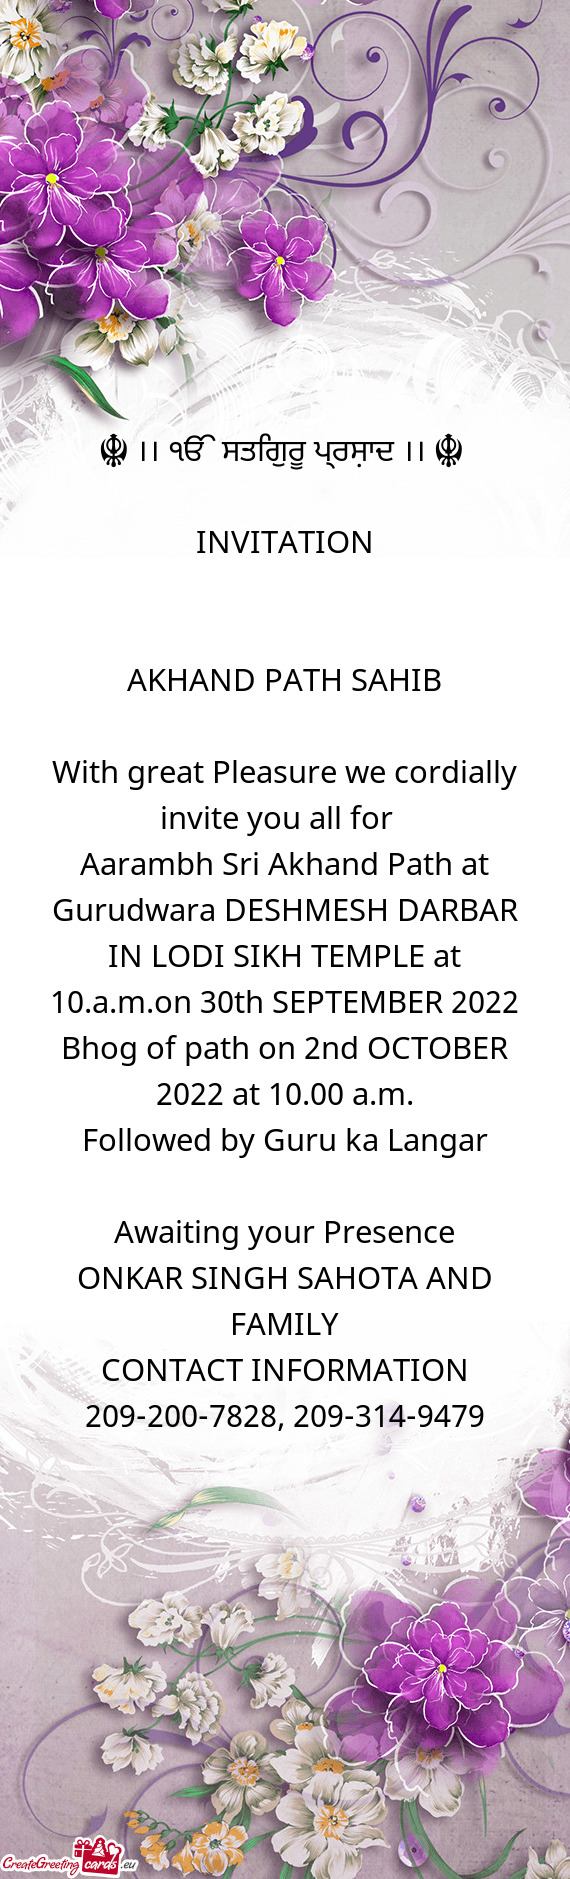 Bhog of path on 2nd OCTOBER 2022 at 10.00 a.m